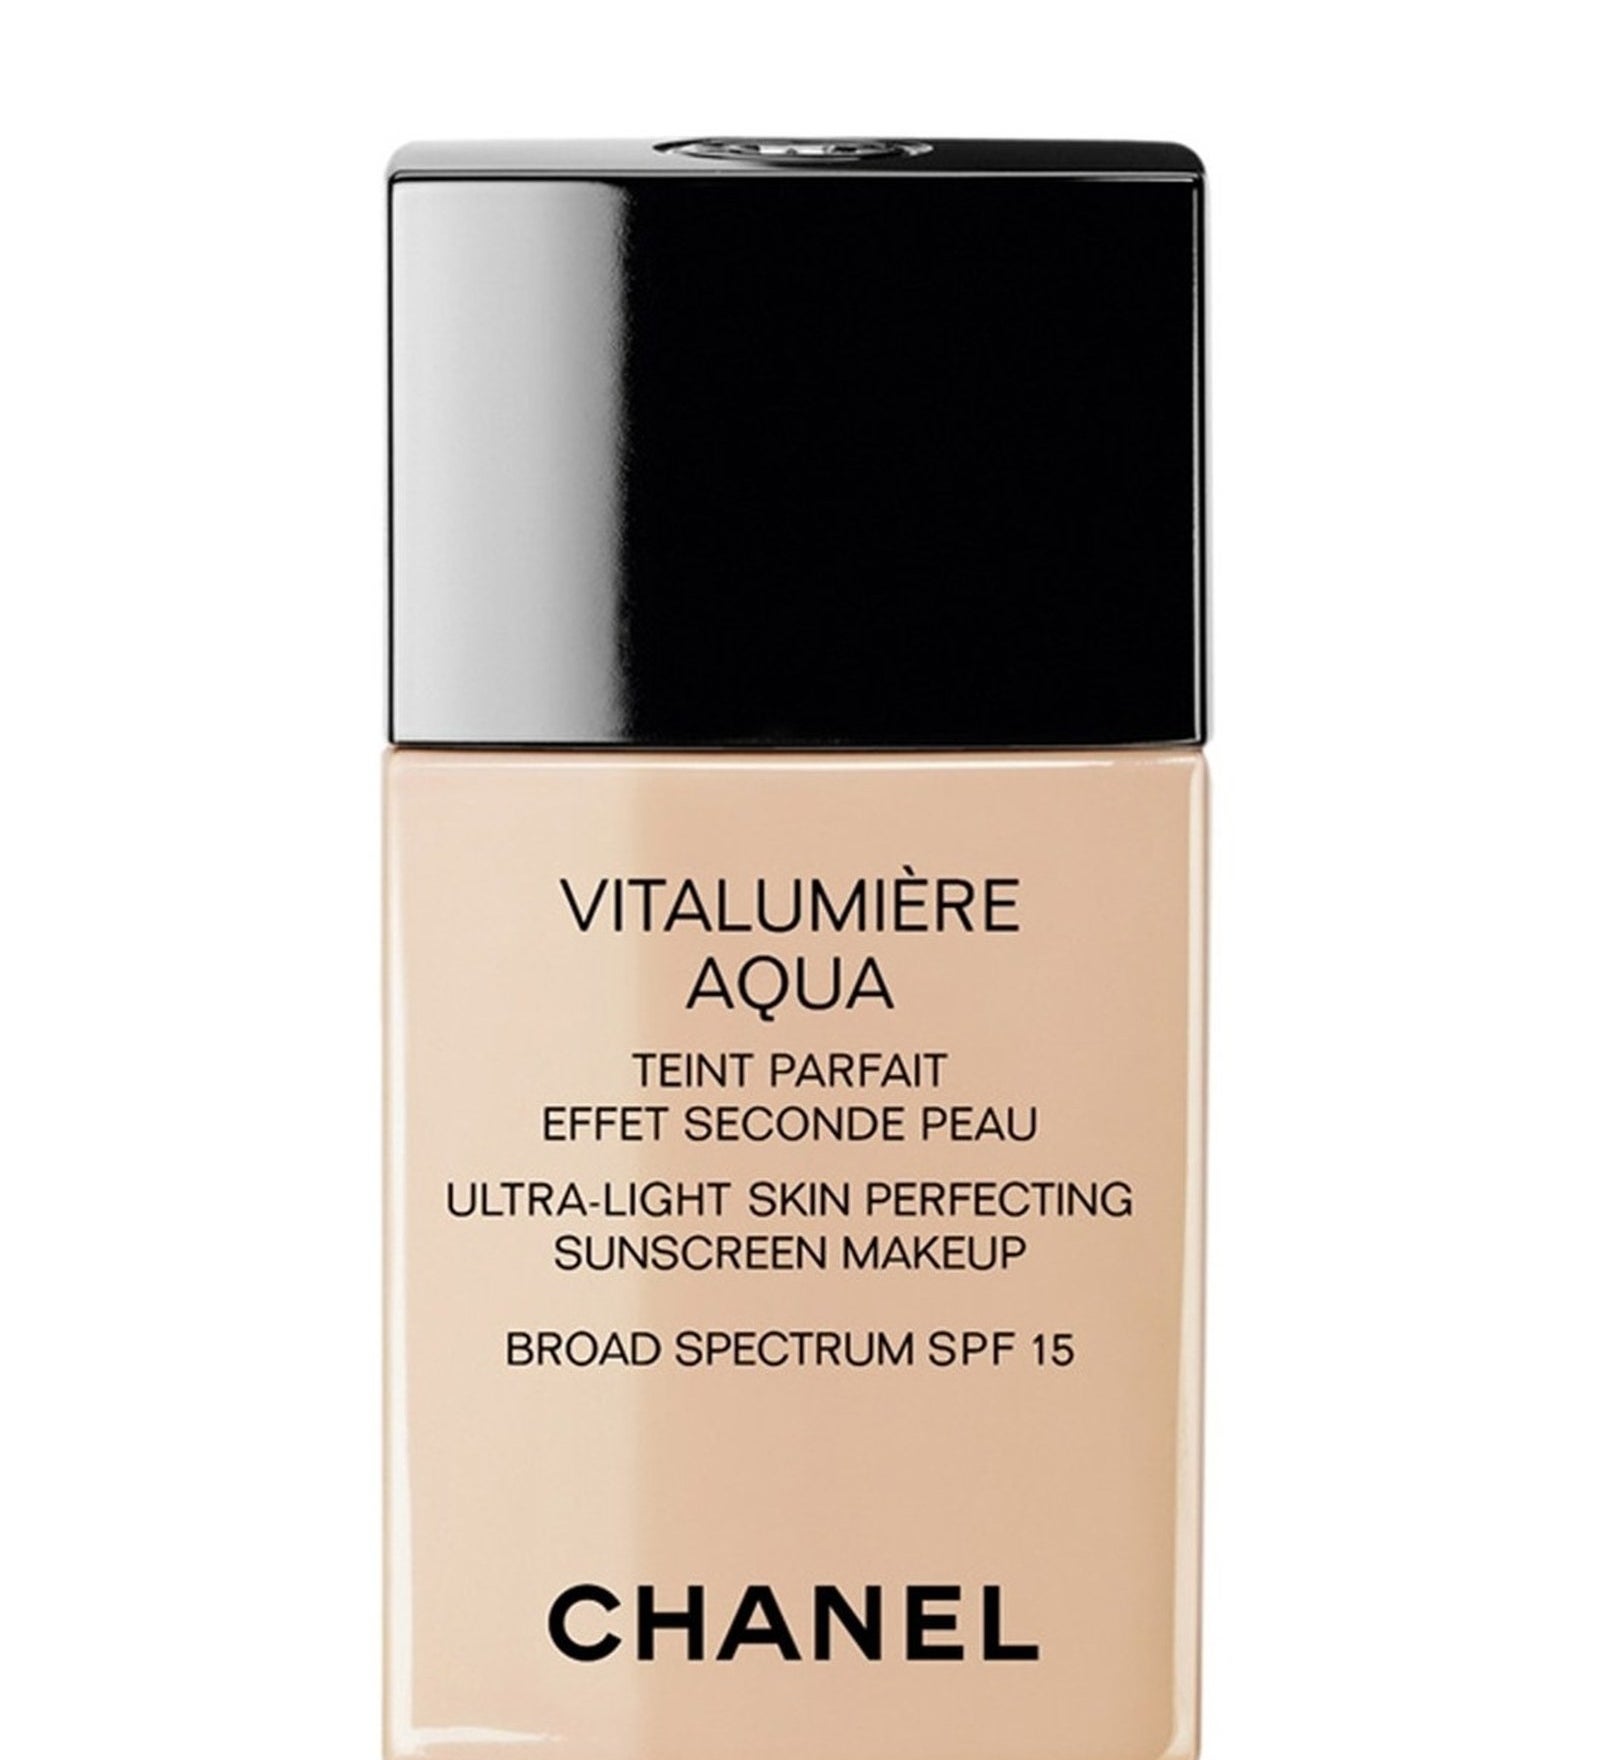 21 Of The Best Foundations With SPF